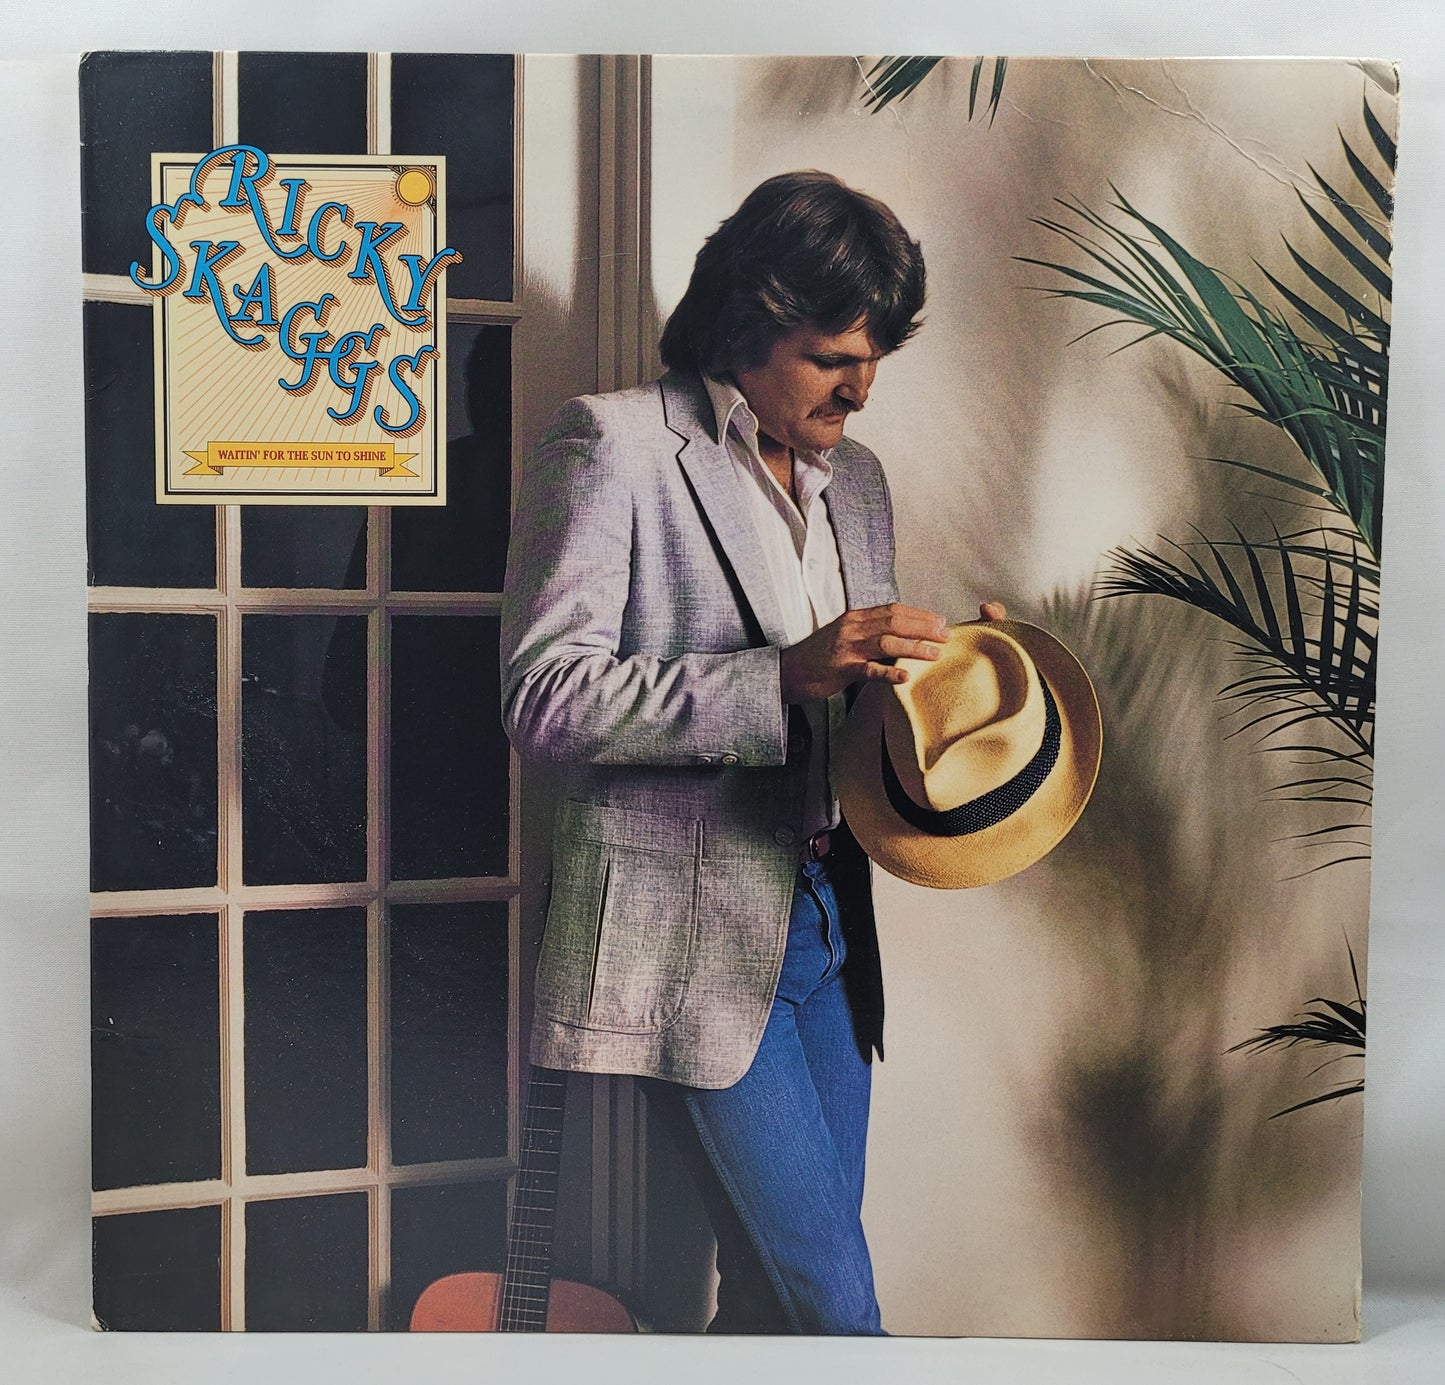 Ricky Skaggs - Waitin' for the Sun to Shine [1981 Pitman] [Used Vinyl Record LP]